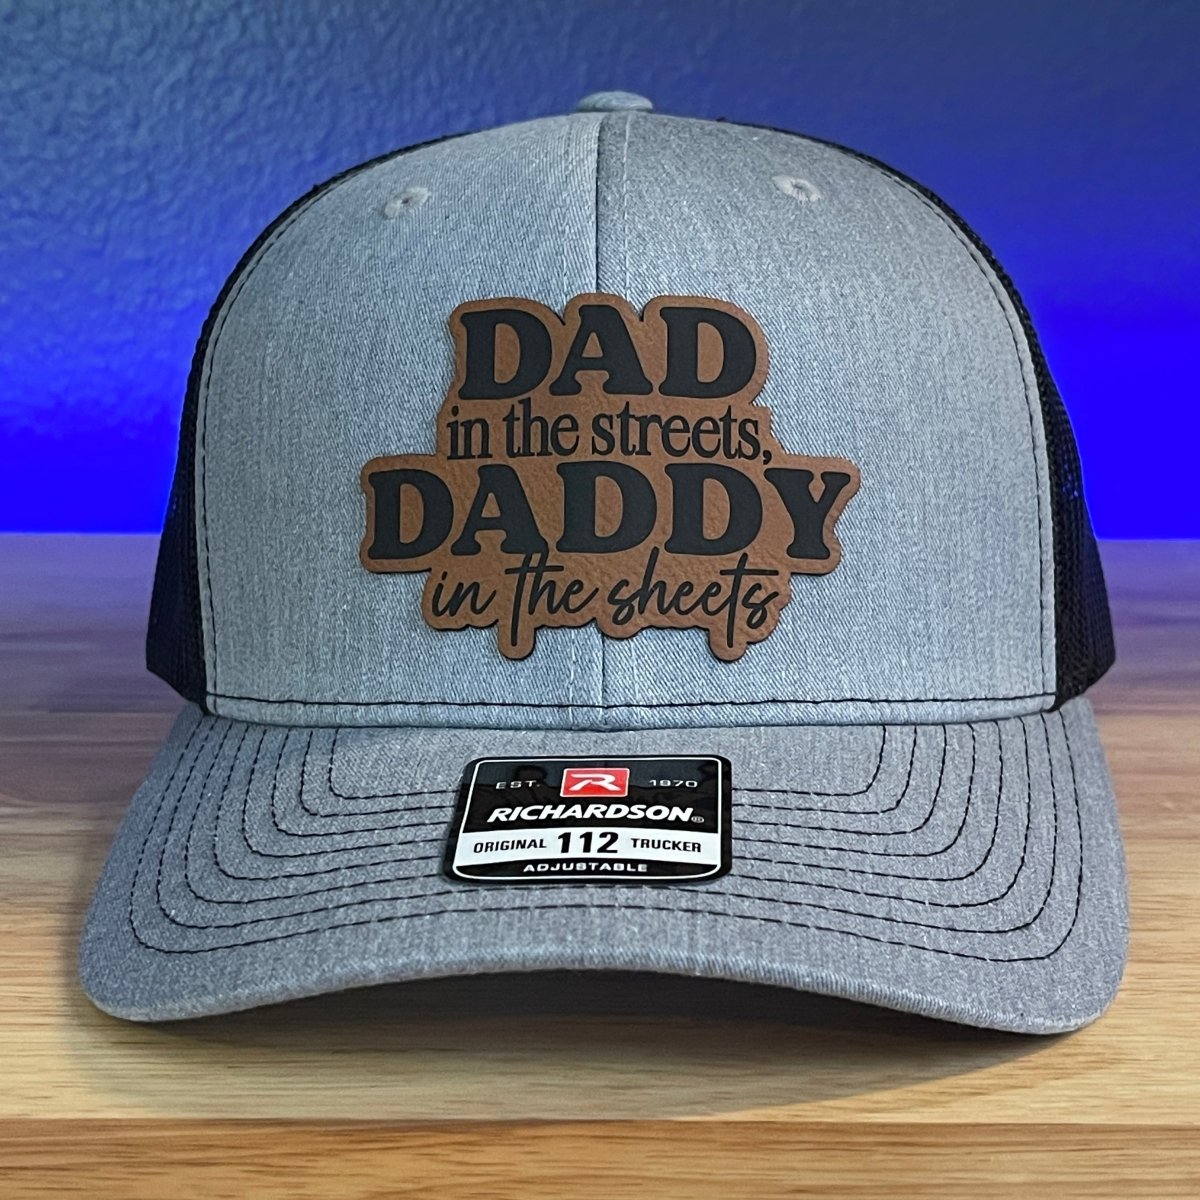 A guide to wearing dad hats this summer - sprezza